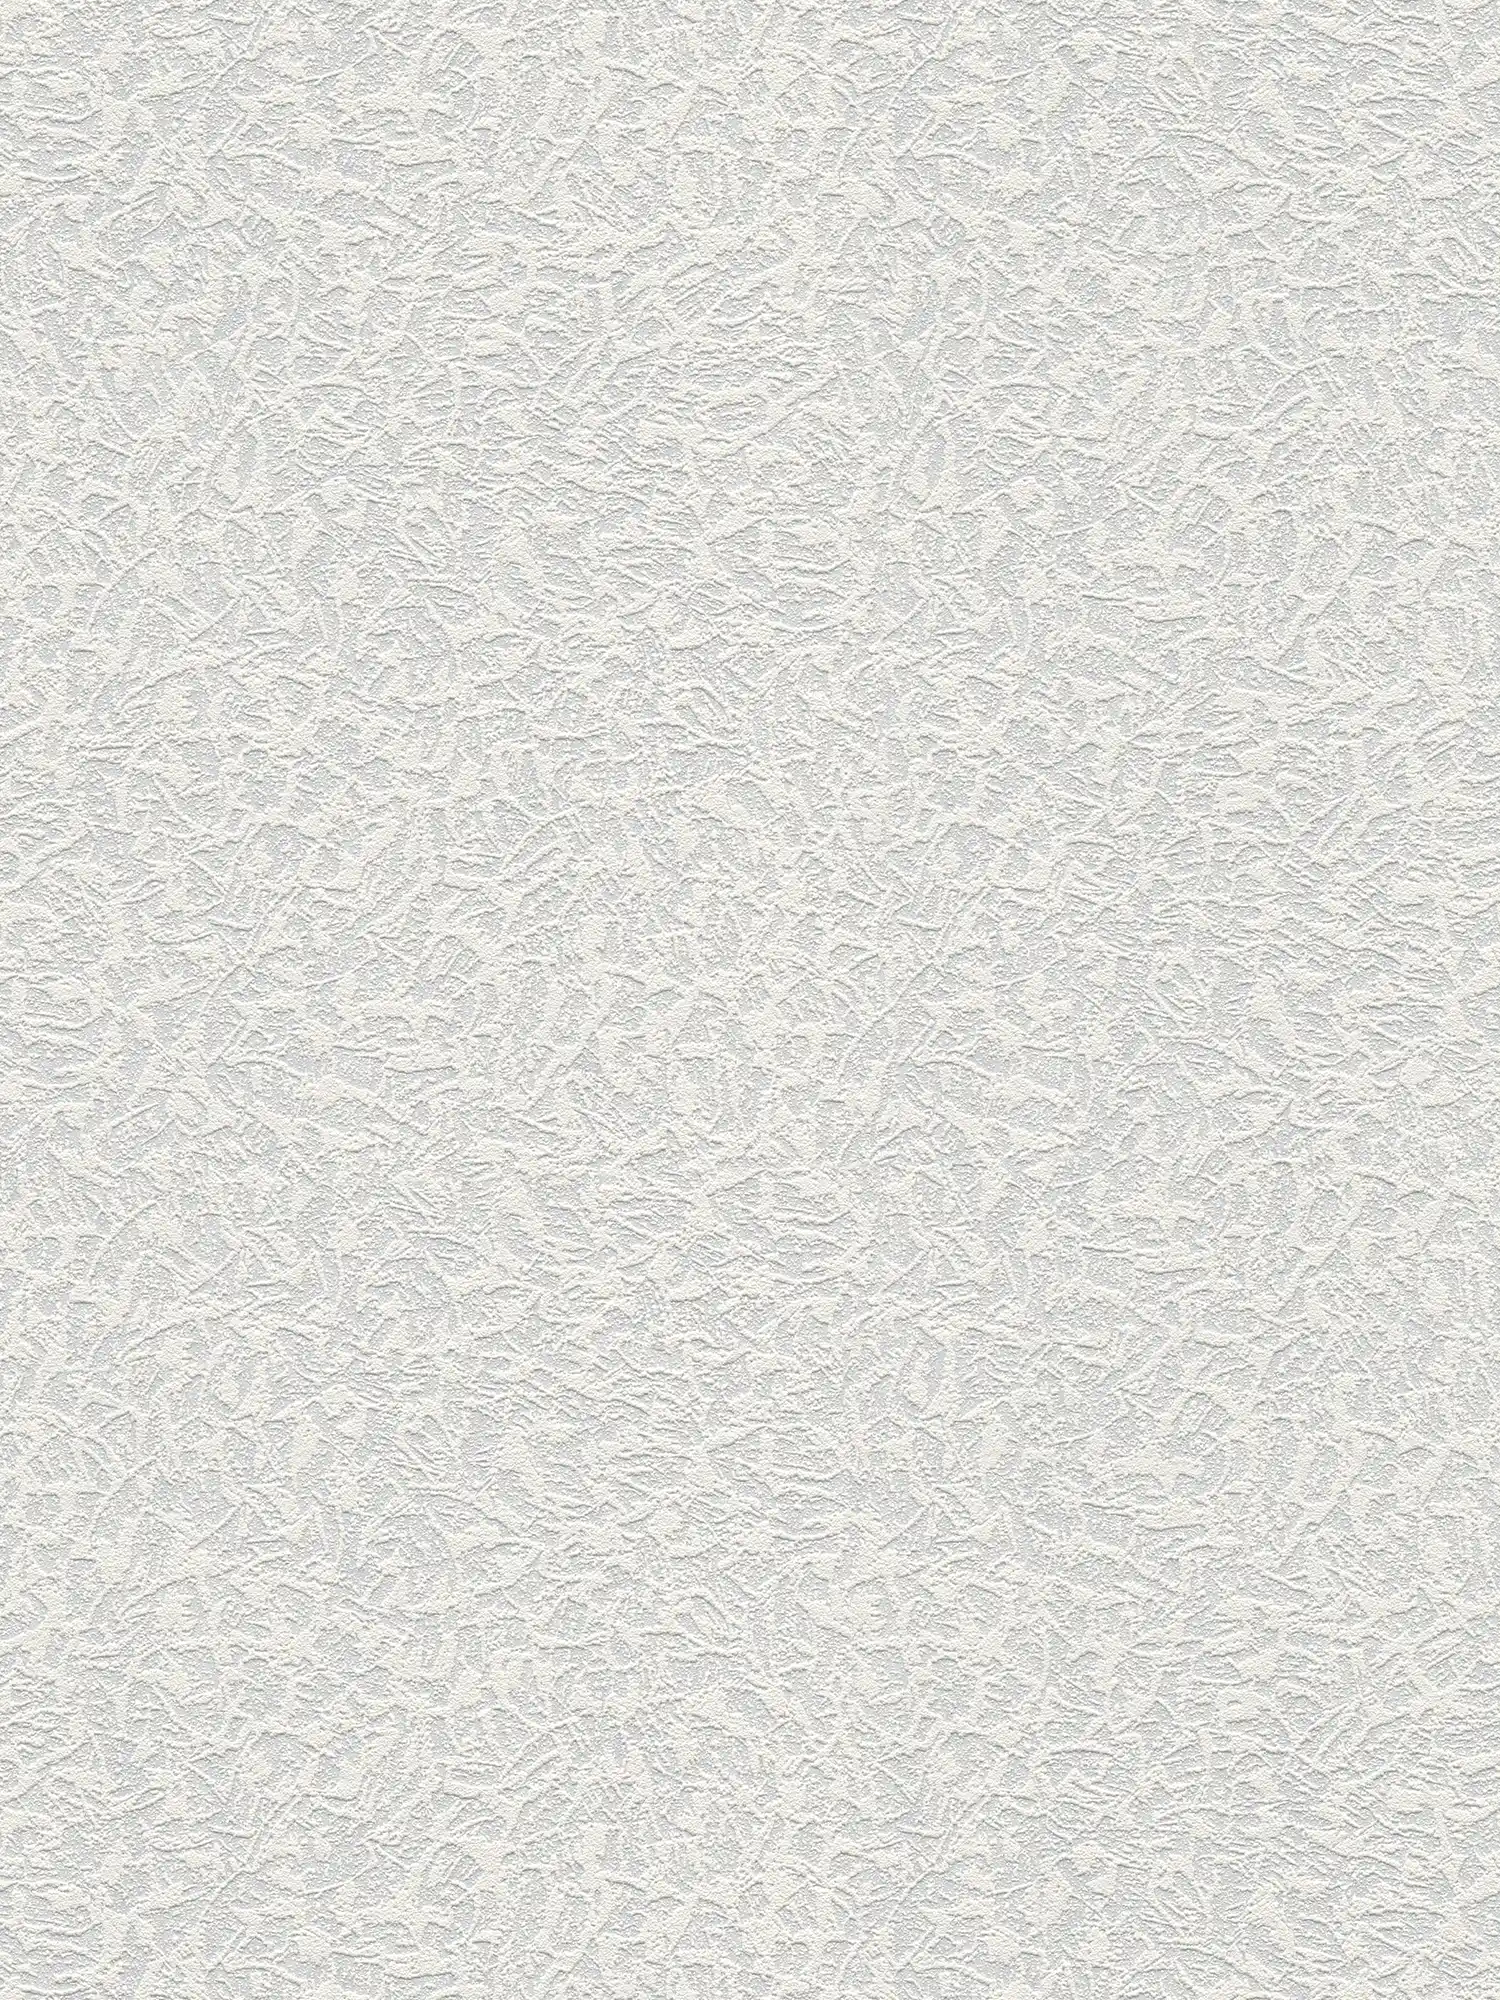 Paintable wallpaper with plaster look pattern - white
